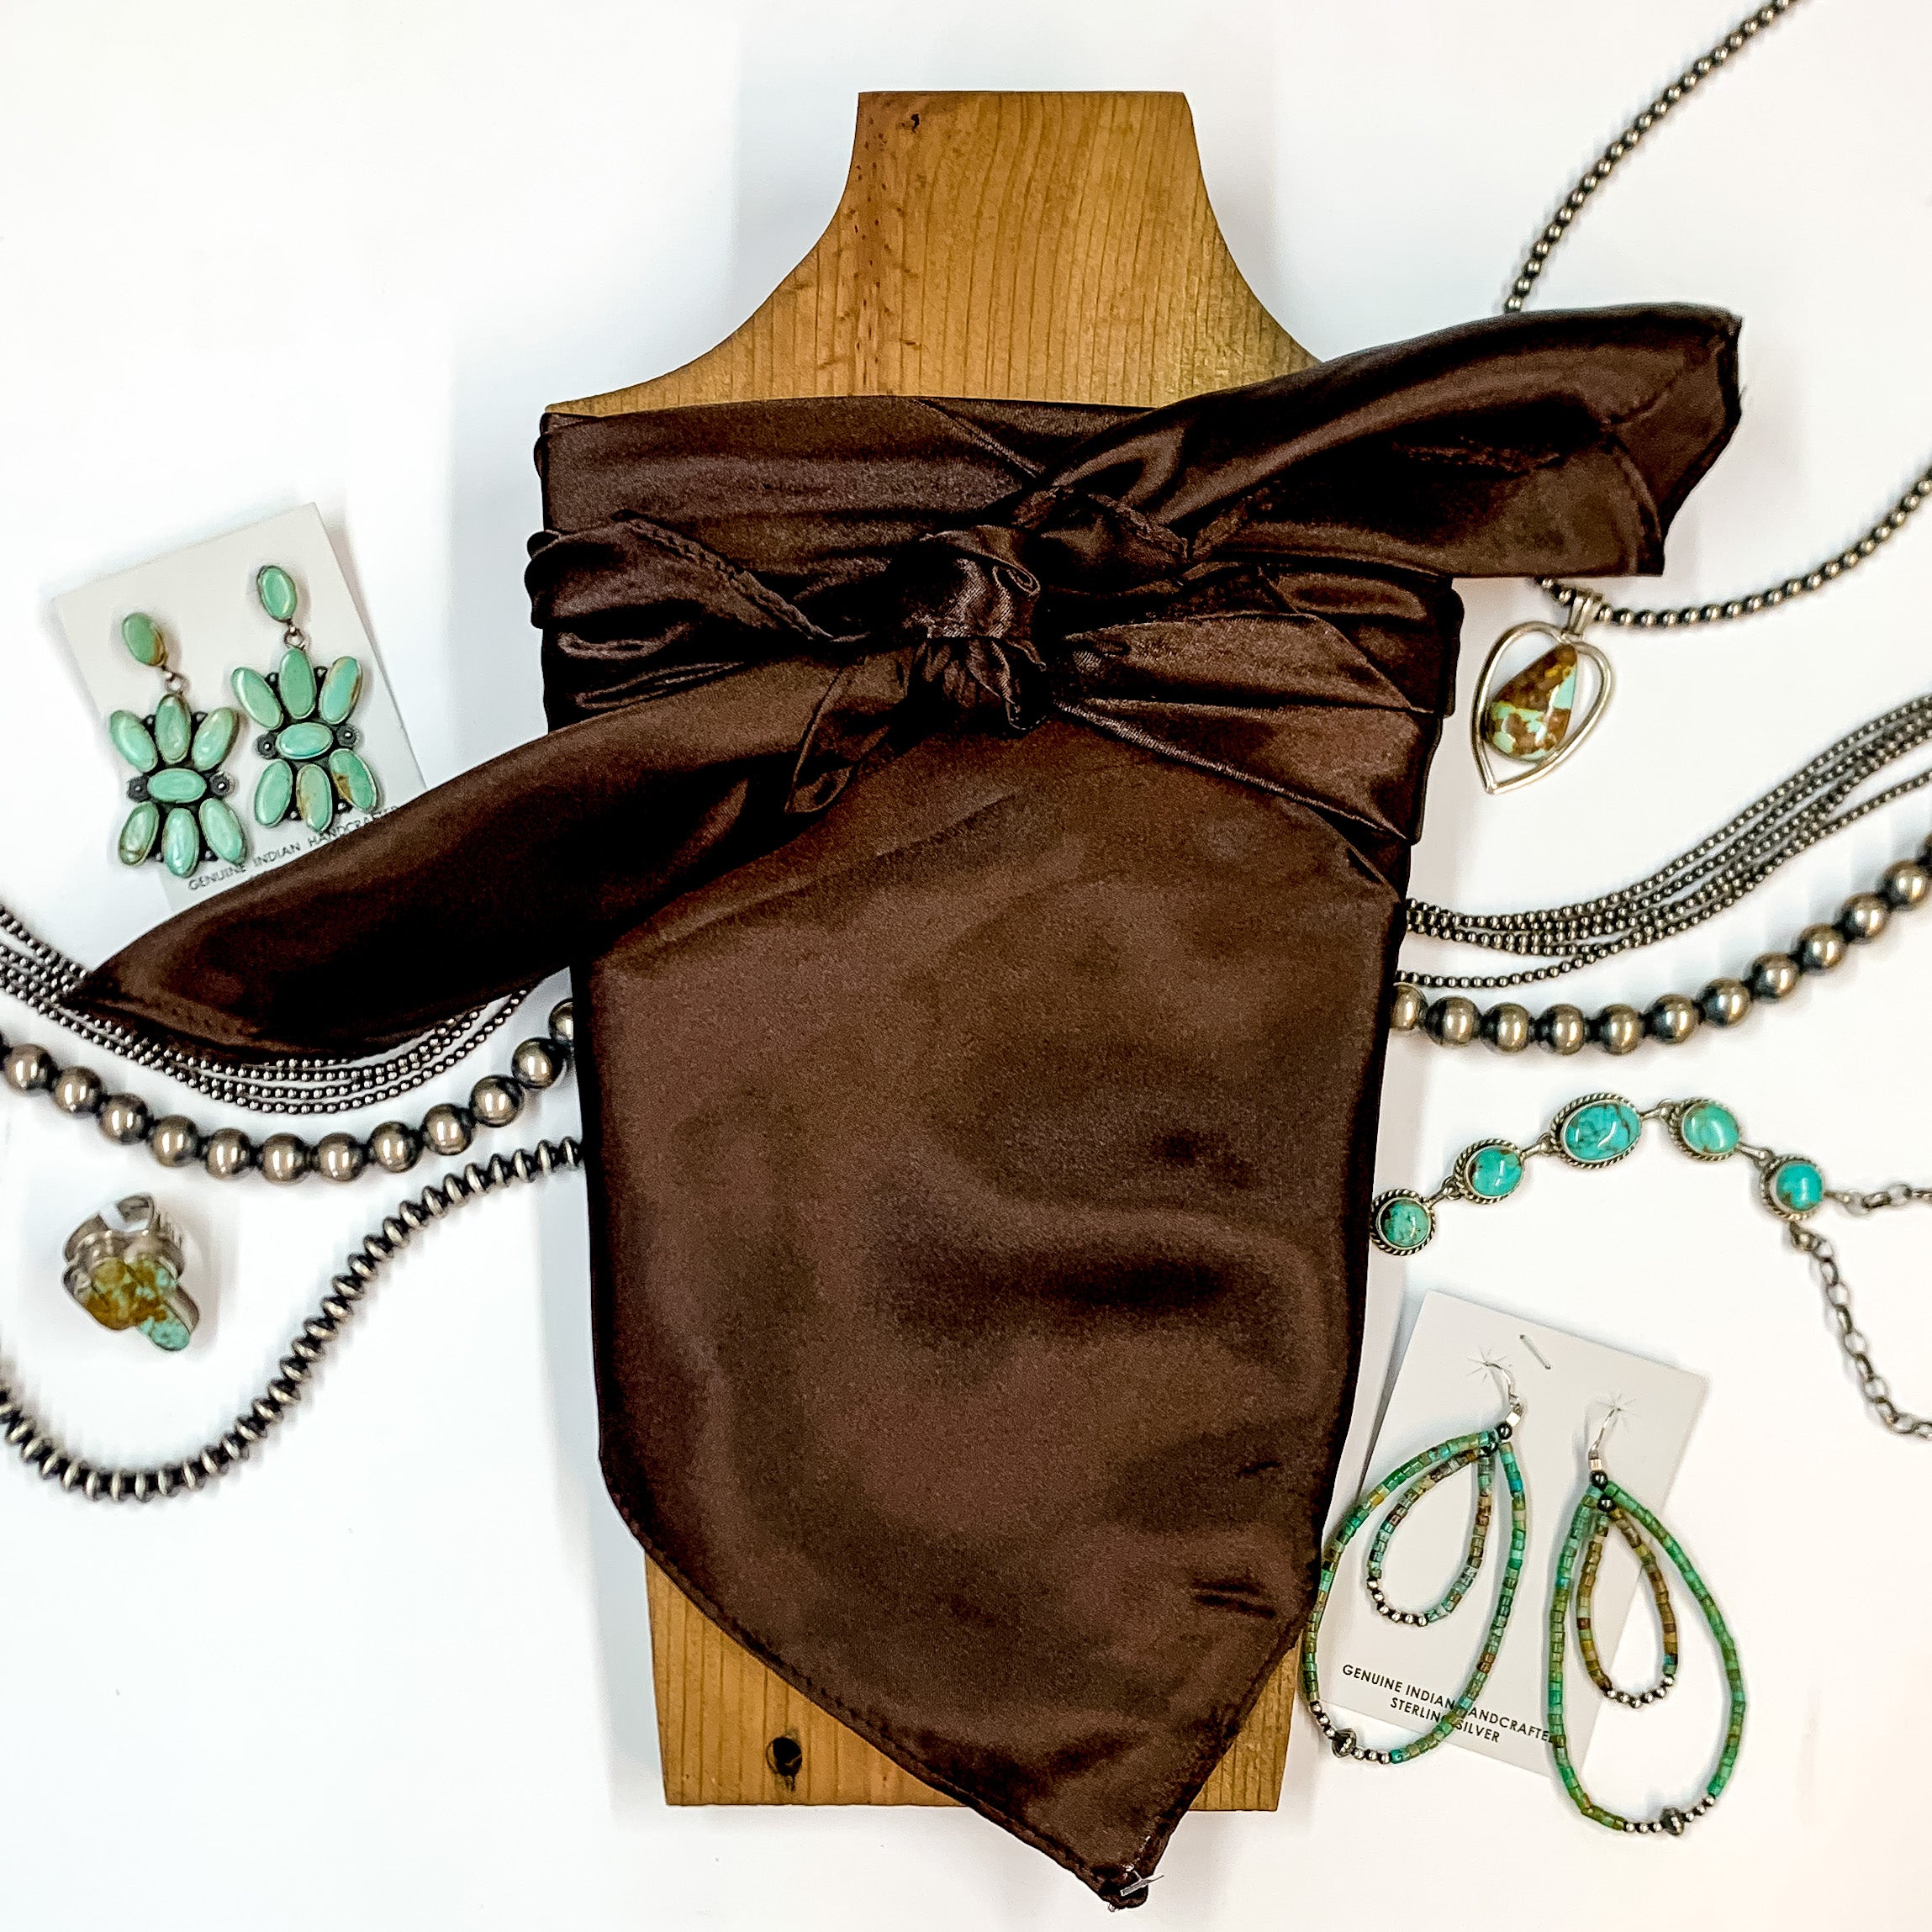 Solid colored scarf in Dark Coffee. Scarf is tied around a wooden piece. The scarf and piece of wood is pictured on a white background with Navajo jewelry spread out around it.